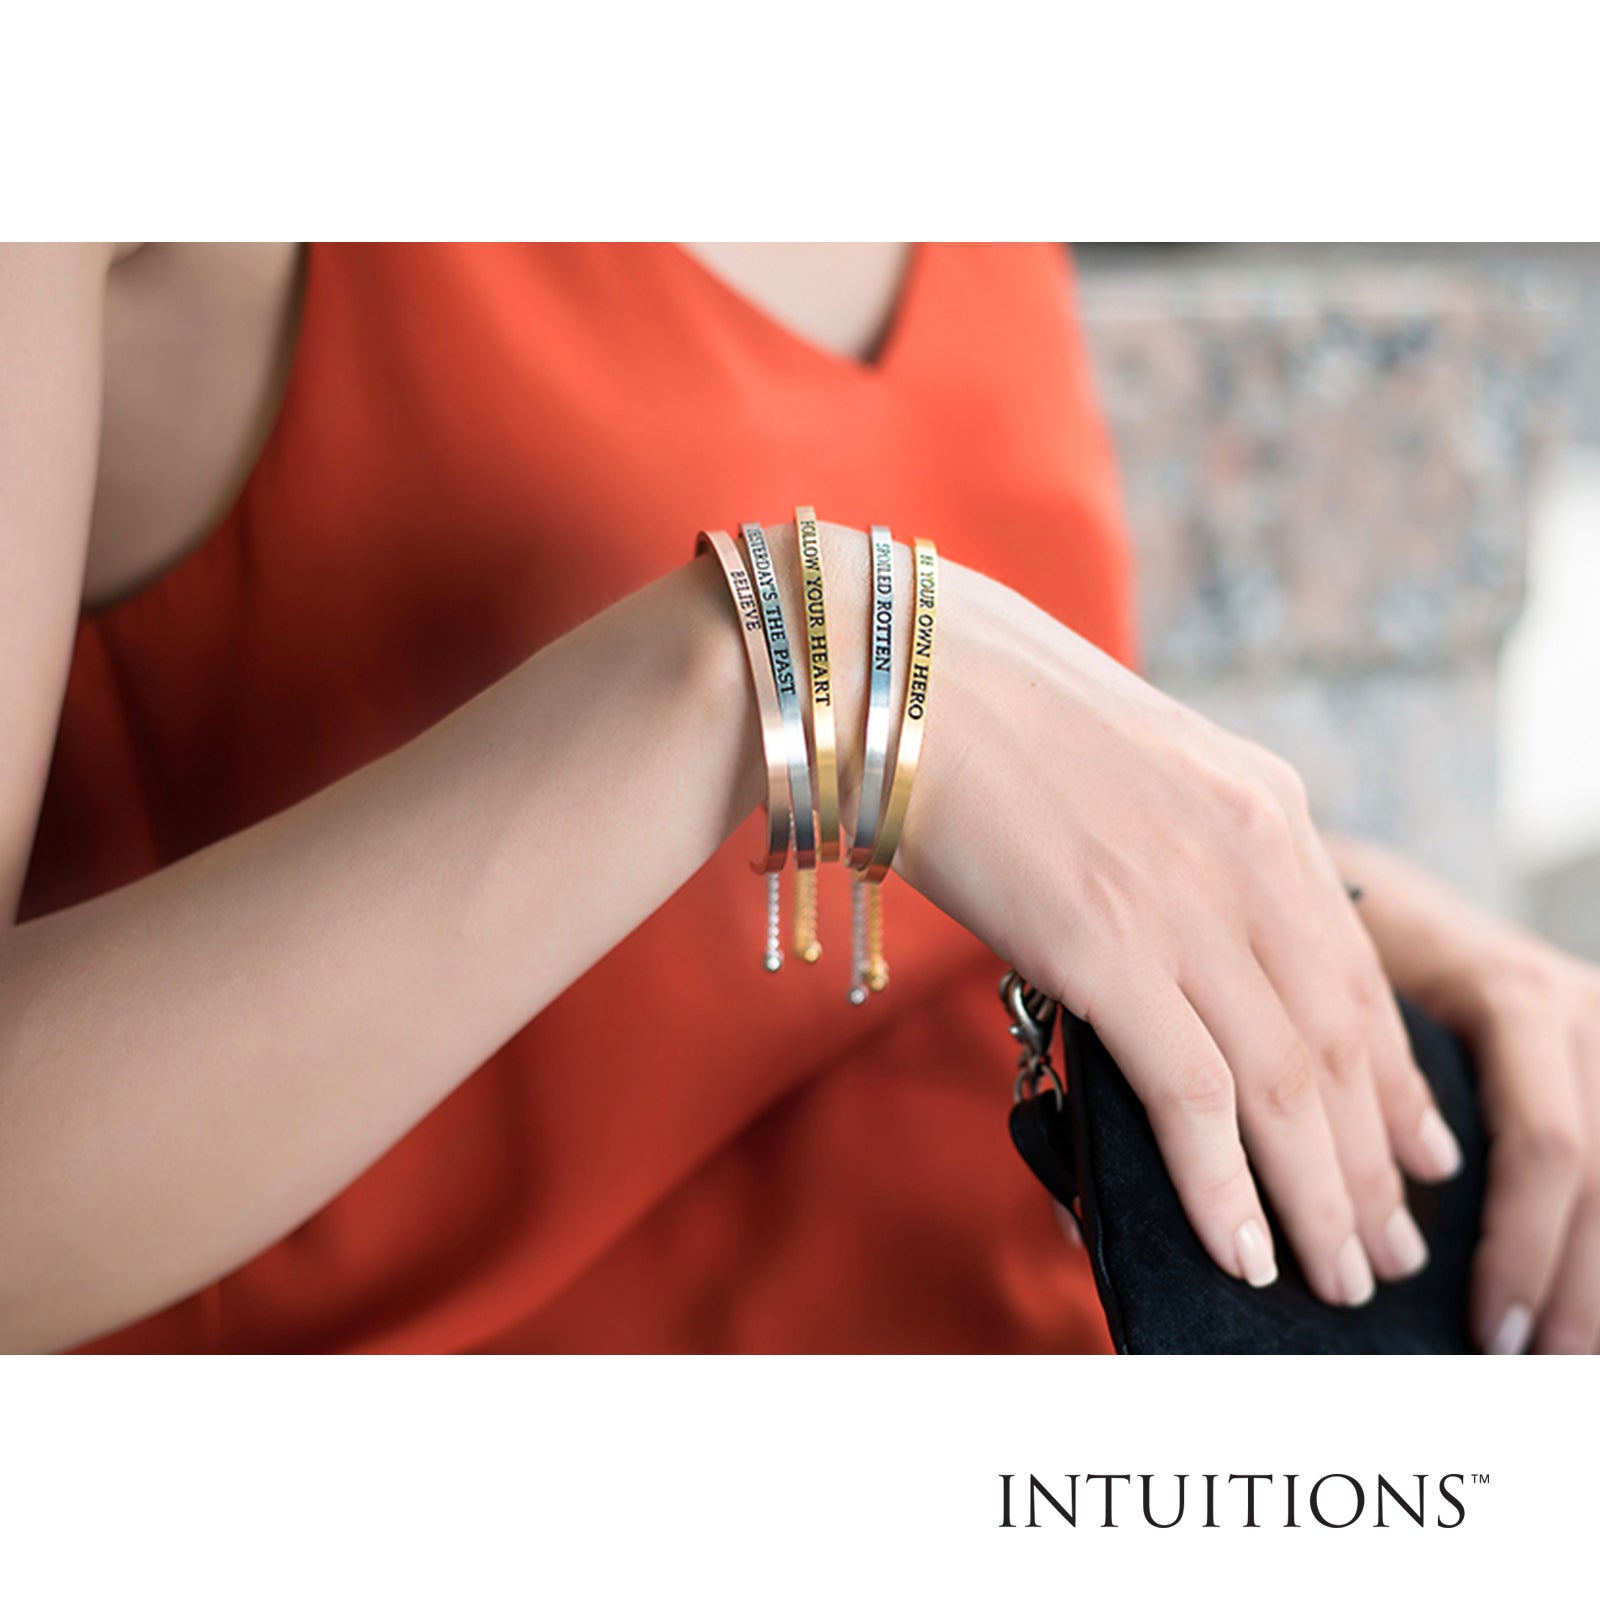 Intuitions Stainless Steel Shiny Square Sideways Cross Bangle Bracelet